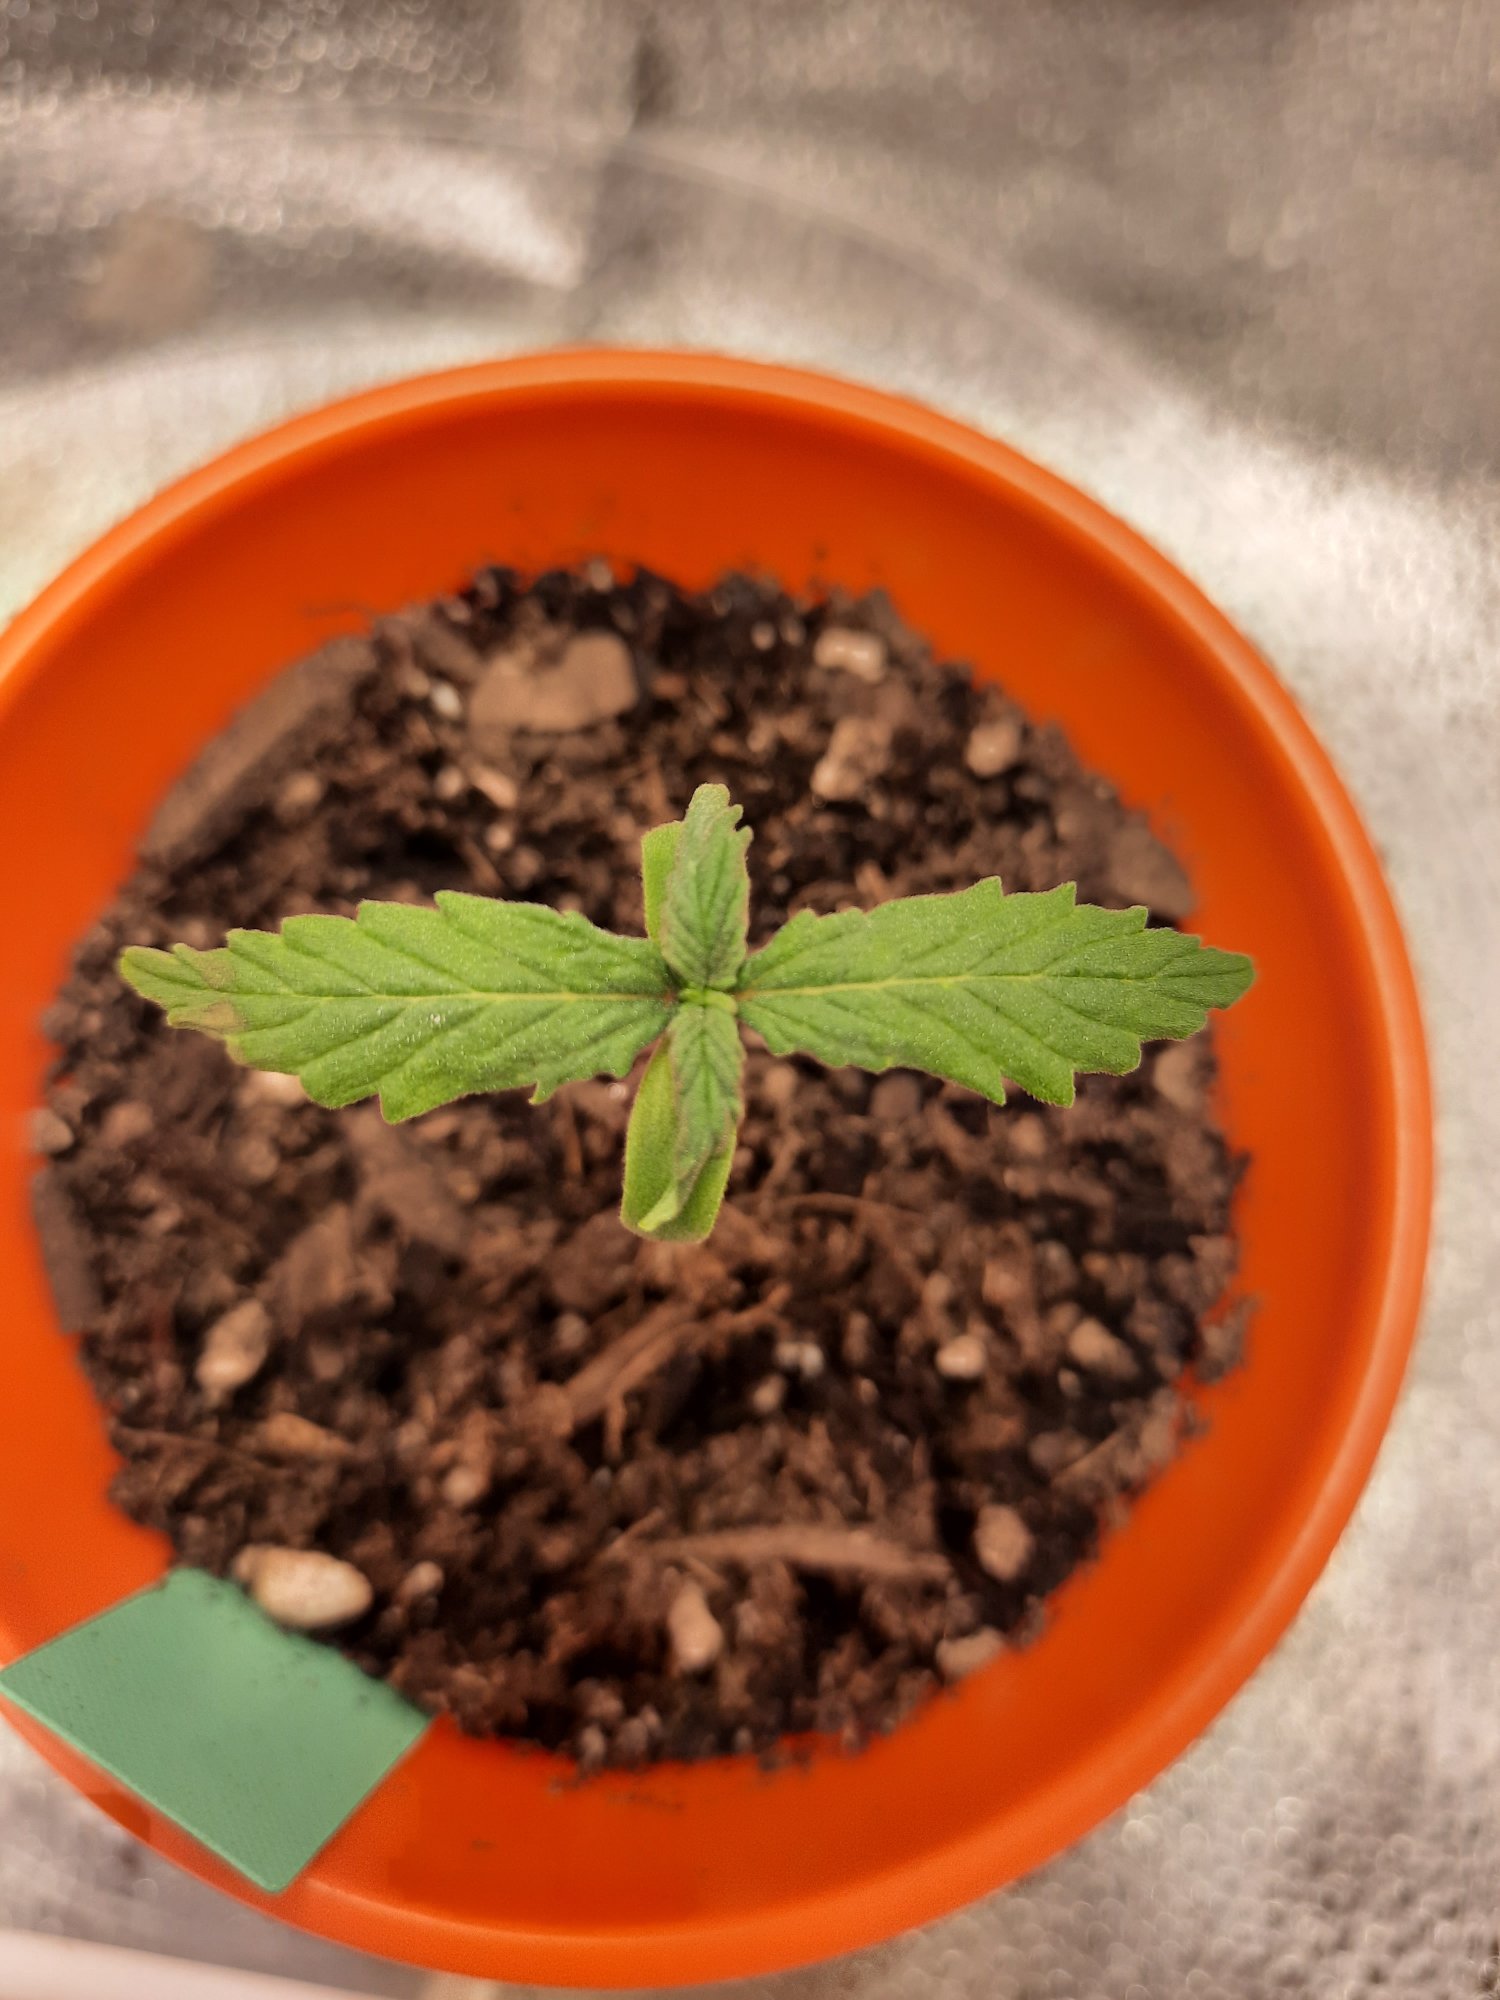 Help having issues with new seedlings 3